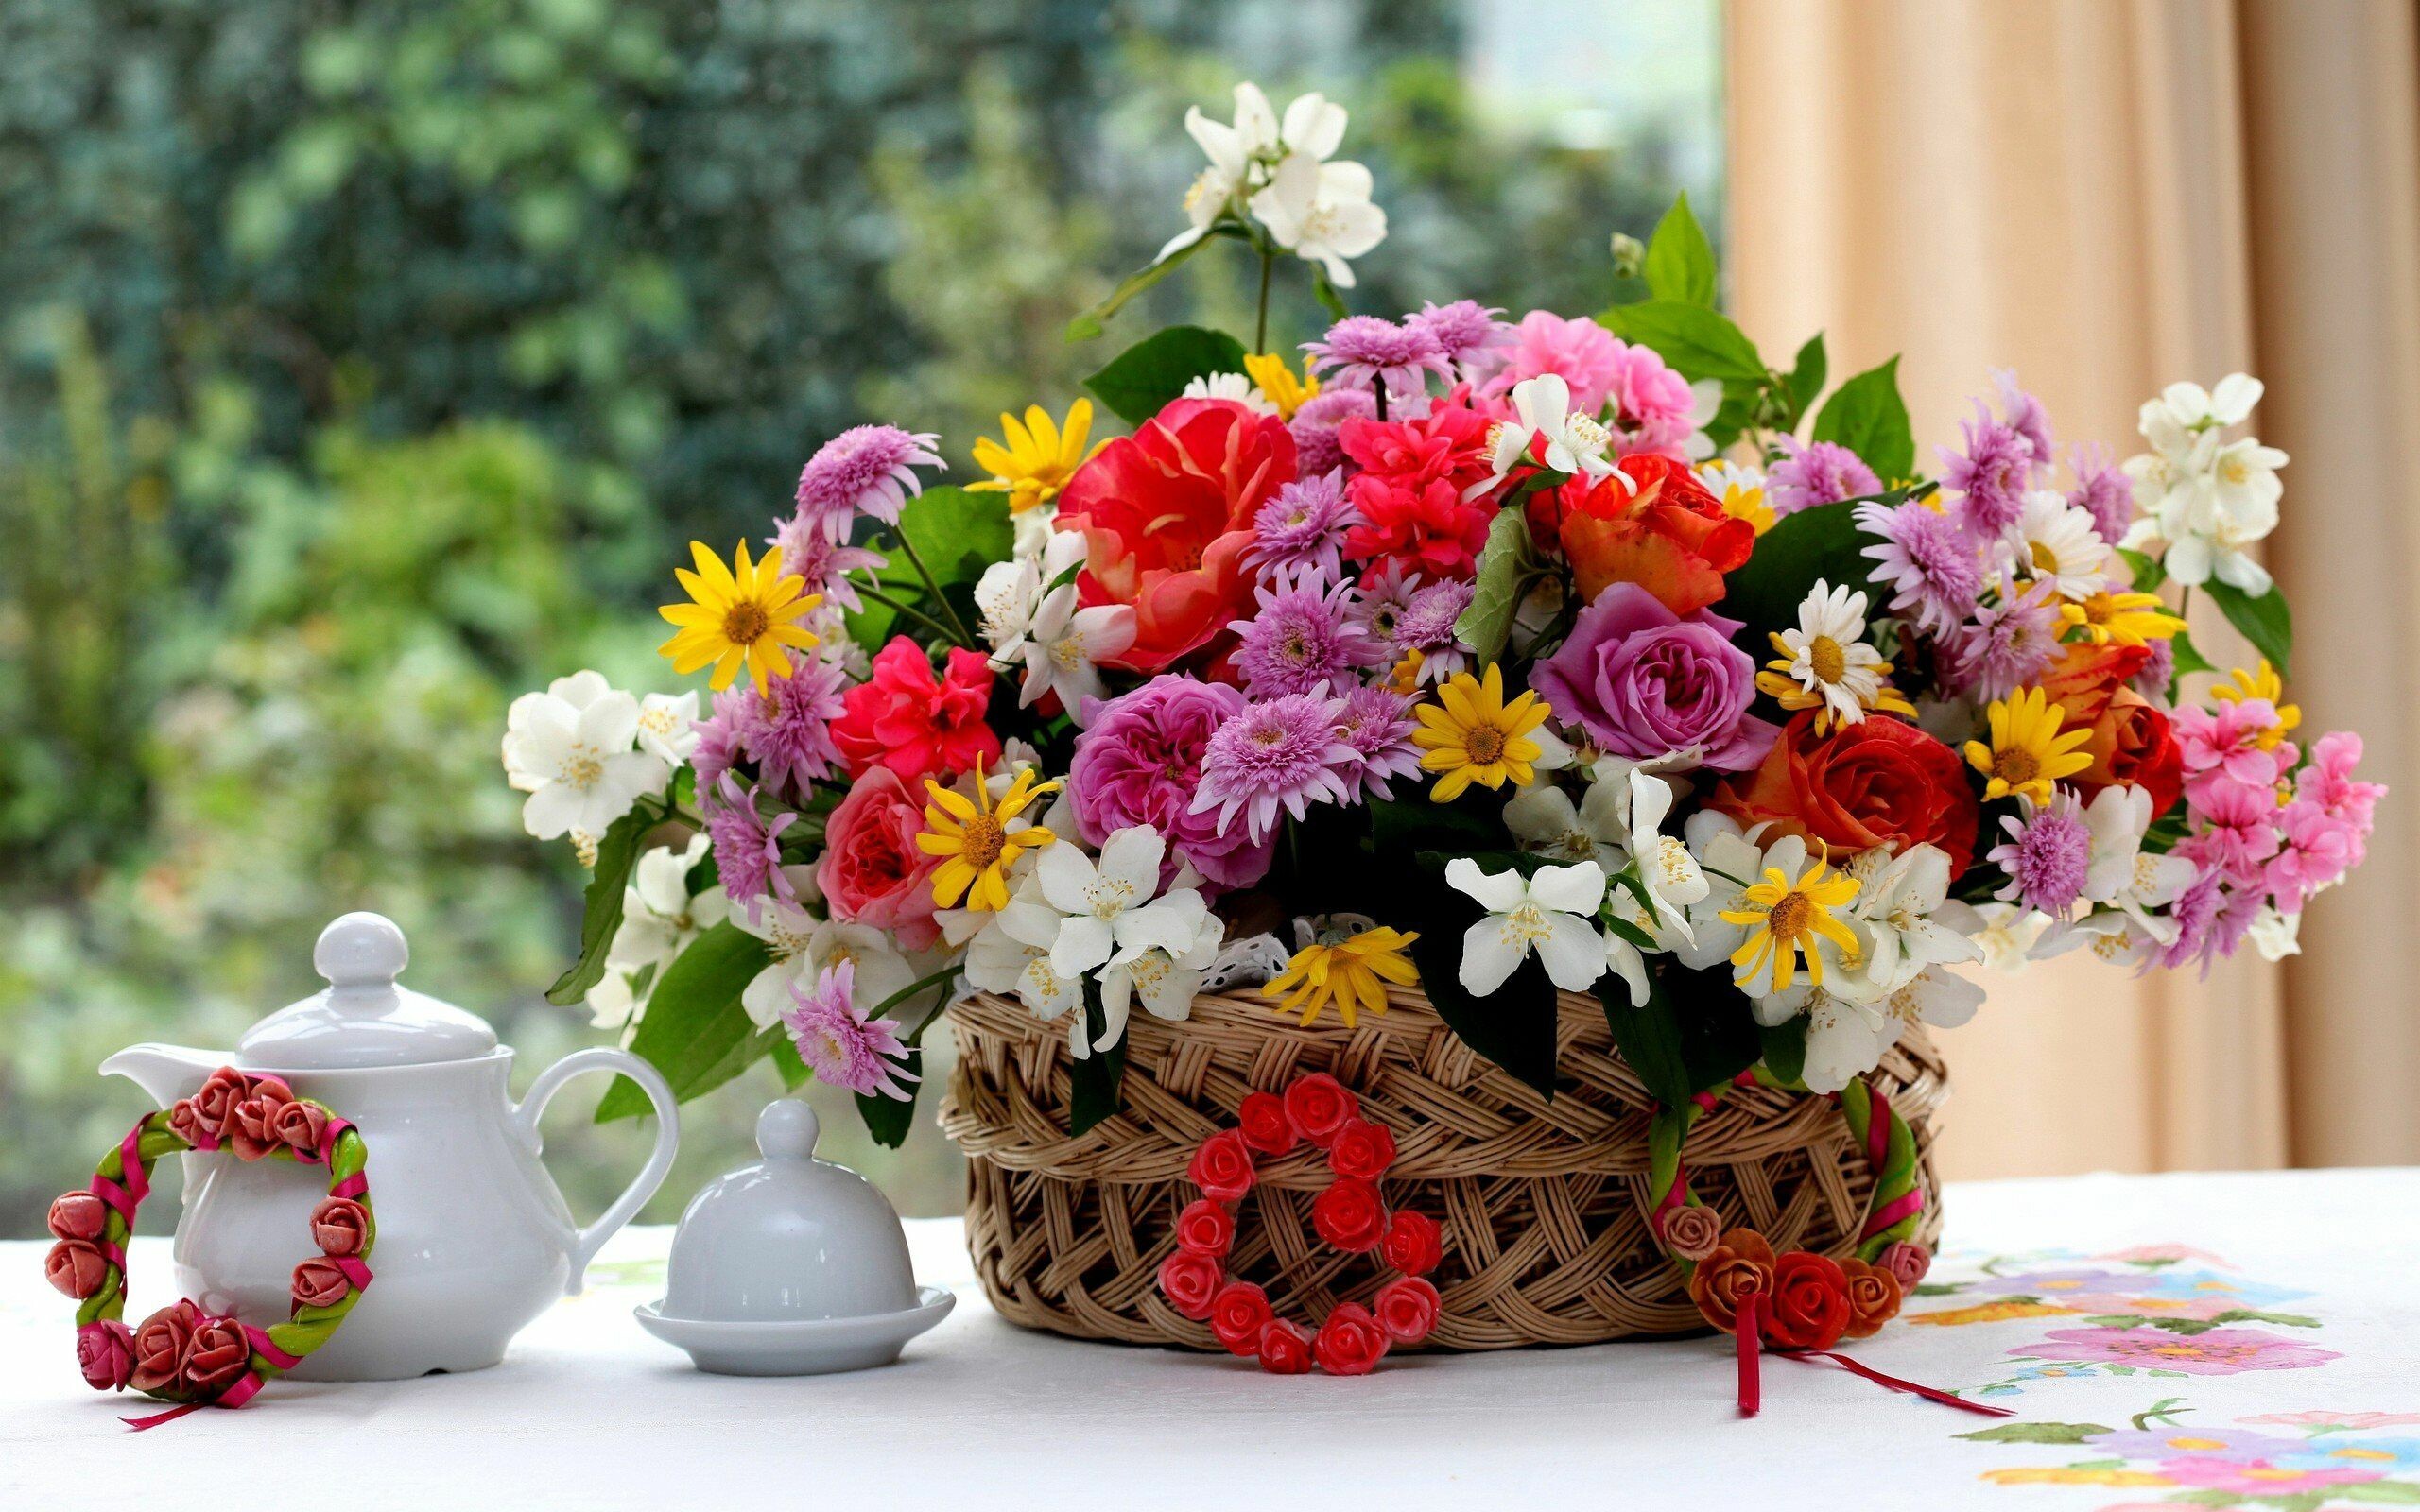 Flower Bouquet: A group of flowers designed into a container, which may be displayed in a vase, box, ceramic, basket, or container. 2560x1600 HD Background.